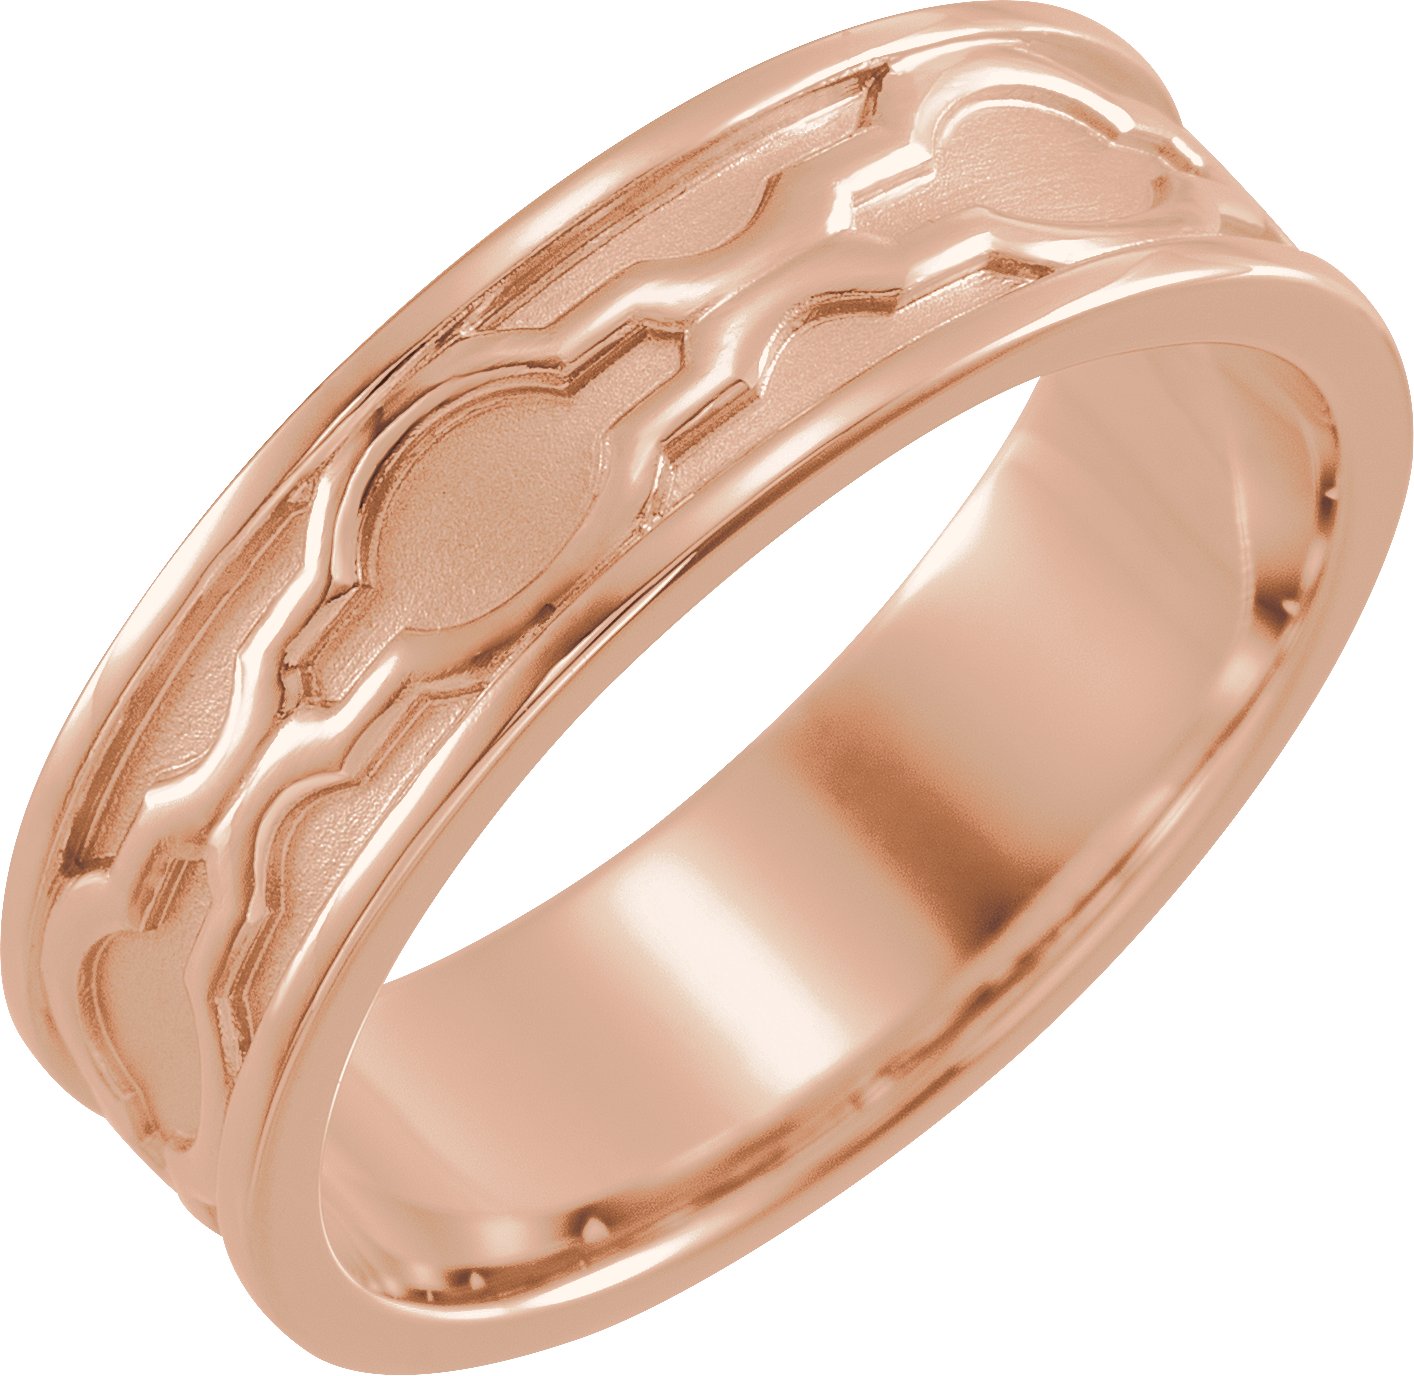 14K Rose 6 mm Patterned Band with Bead Blast Finish Size 7 Ref 16324069